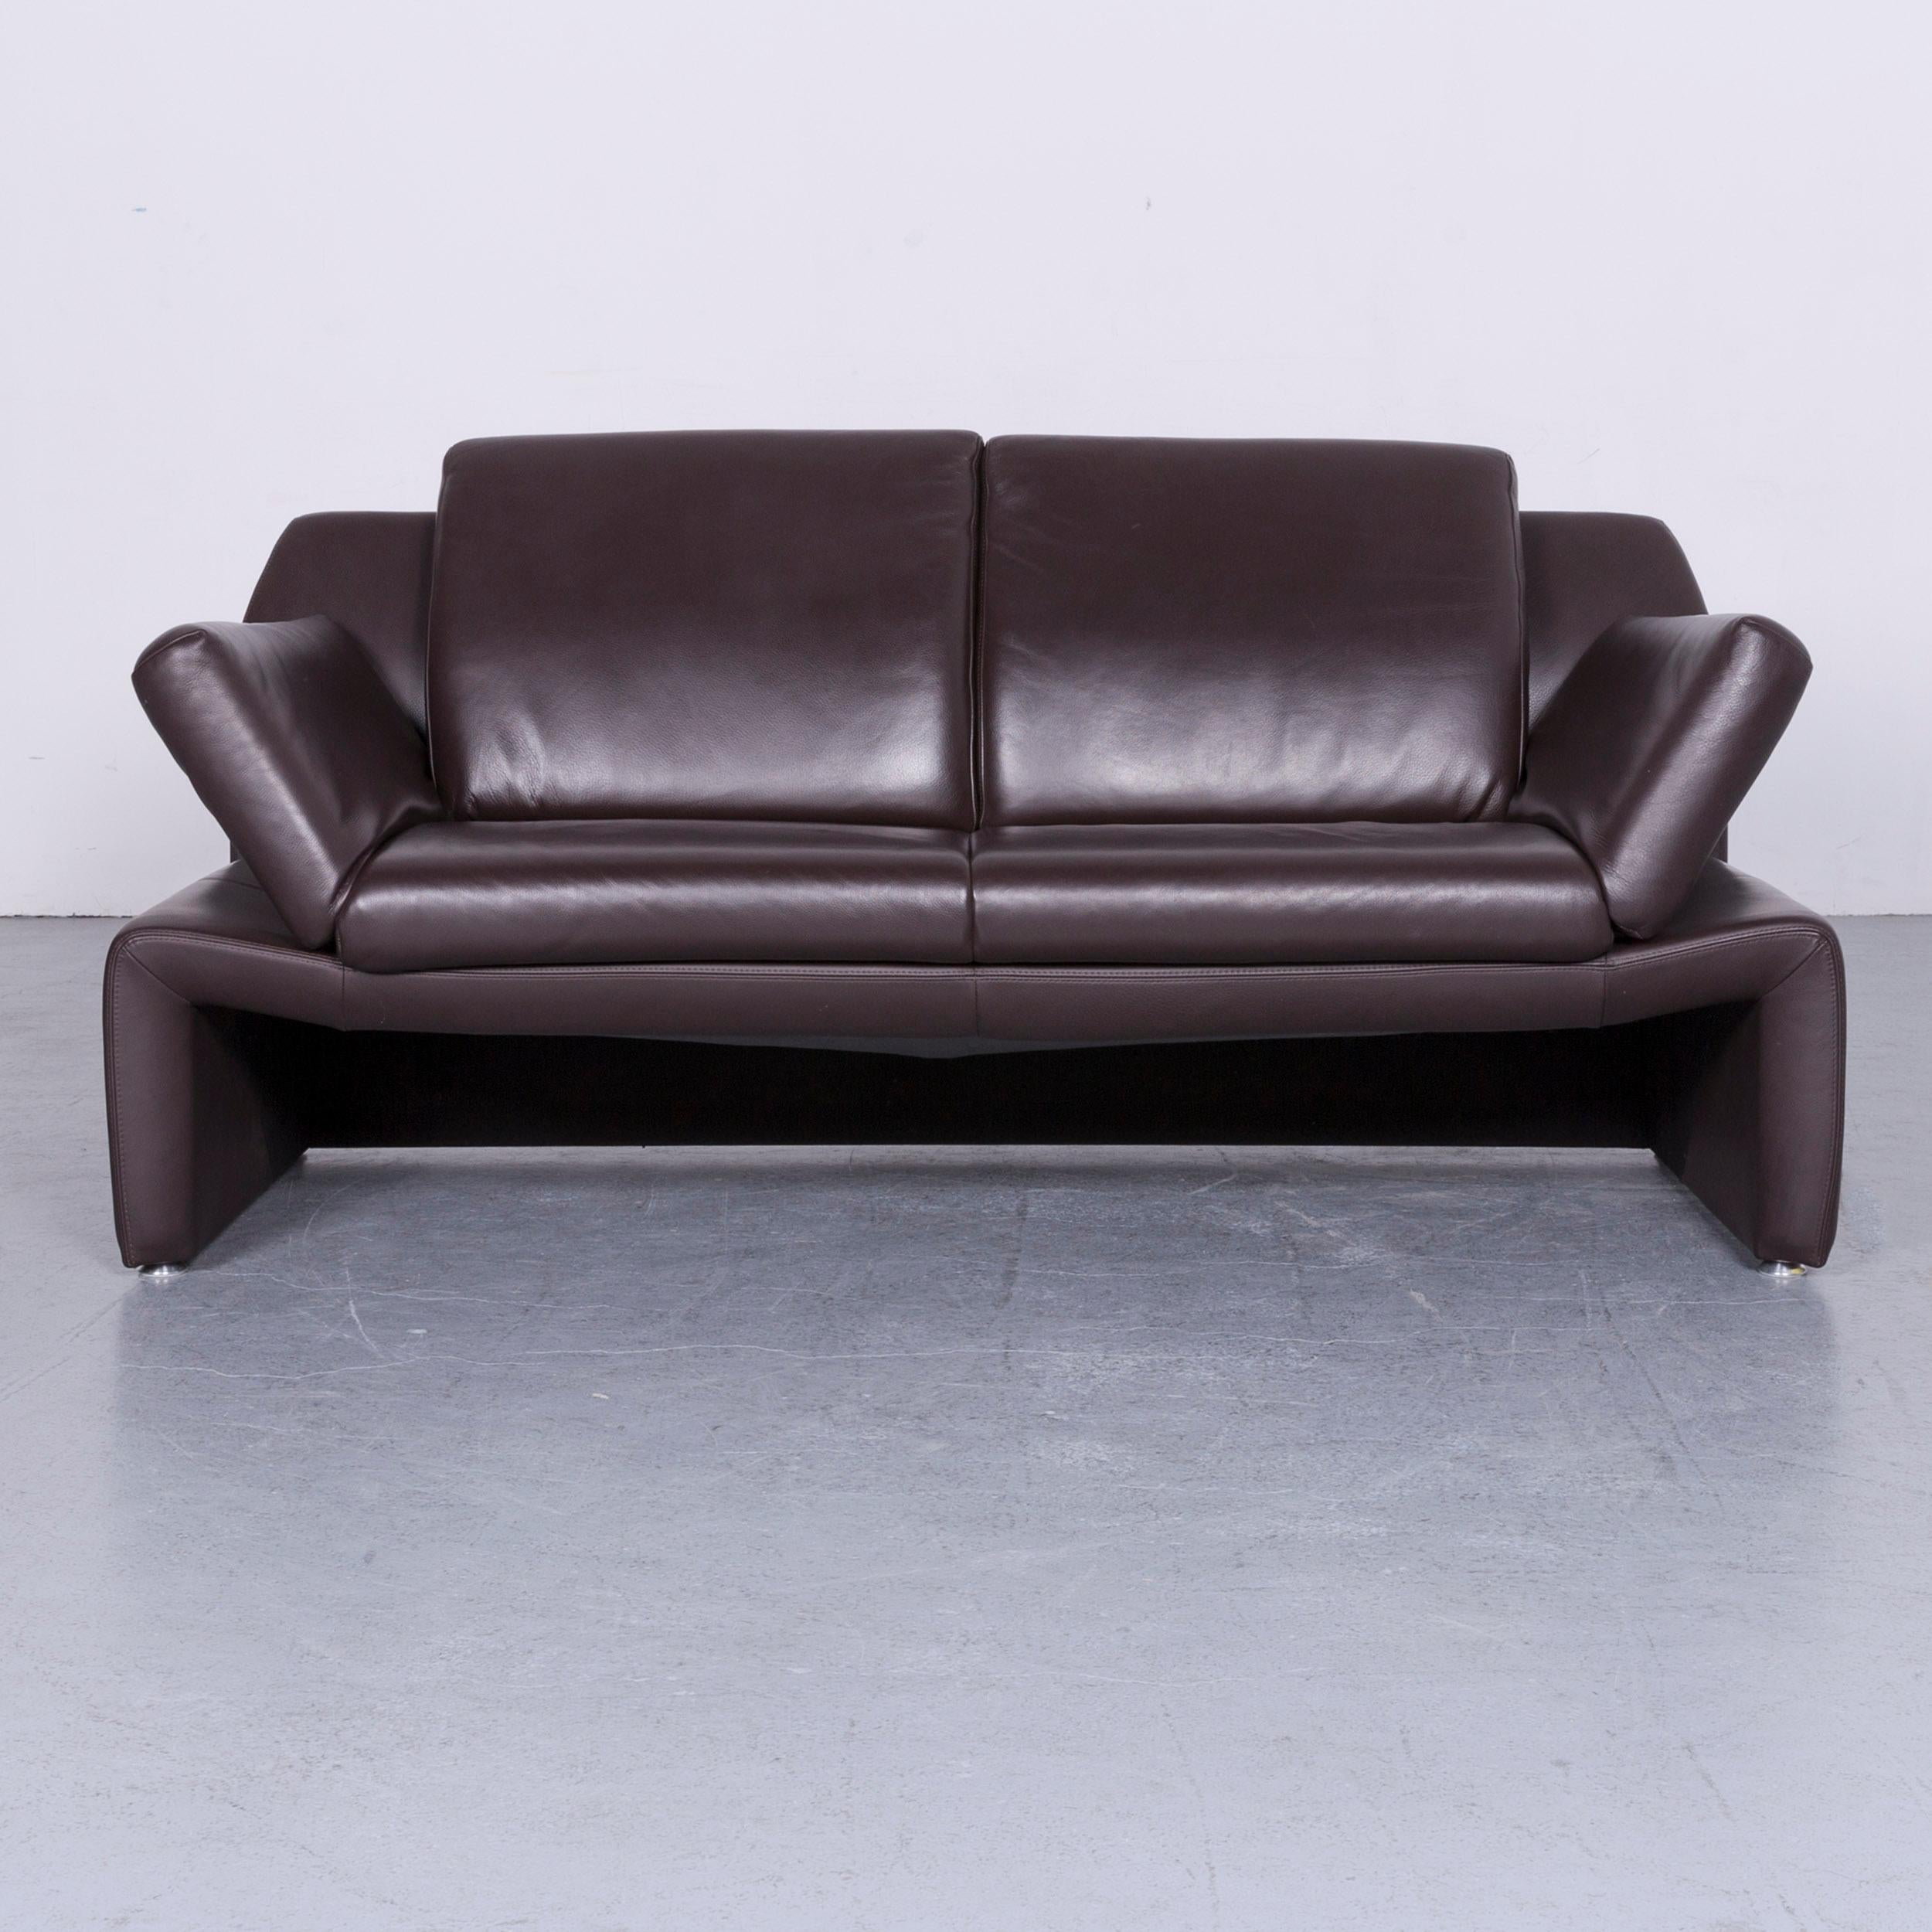 We bring to you a Laauser designer leather sofa brown two-seat couch.